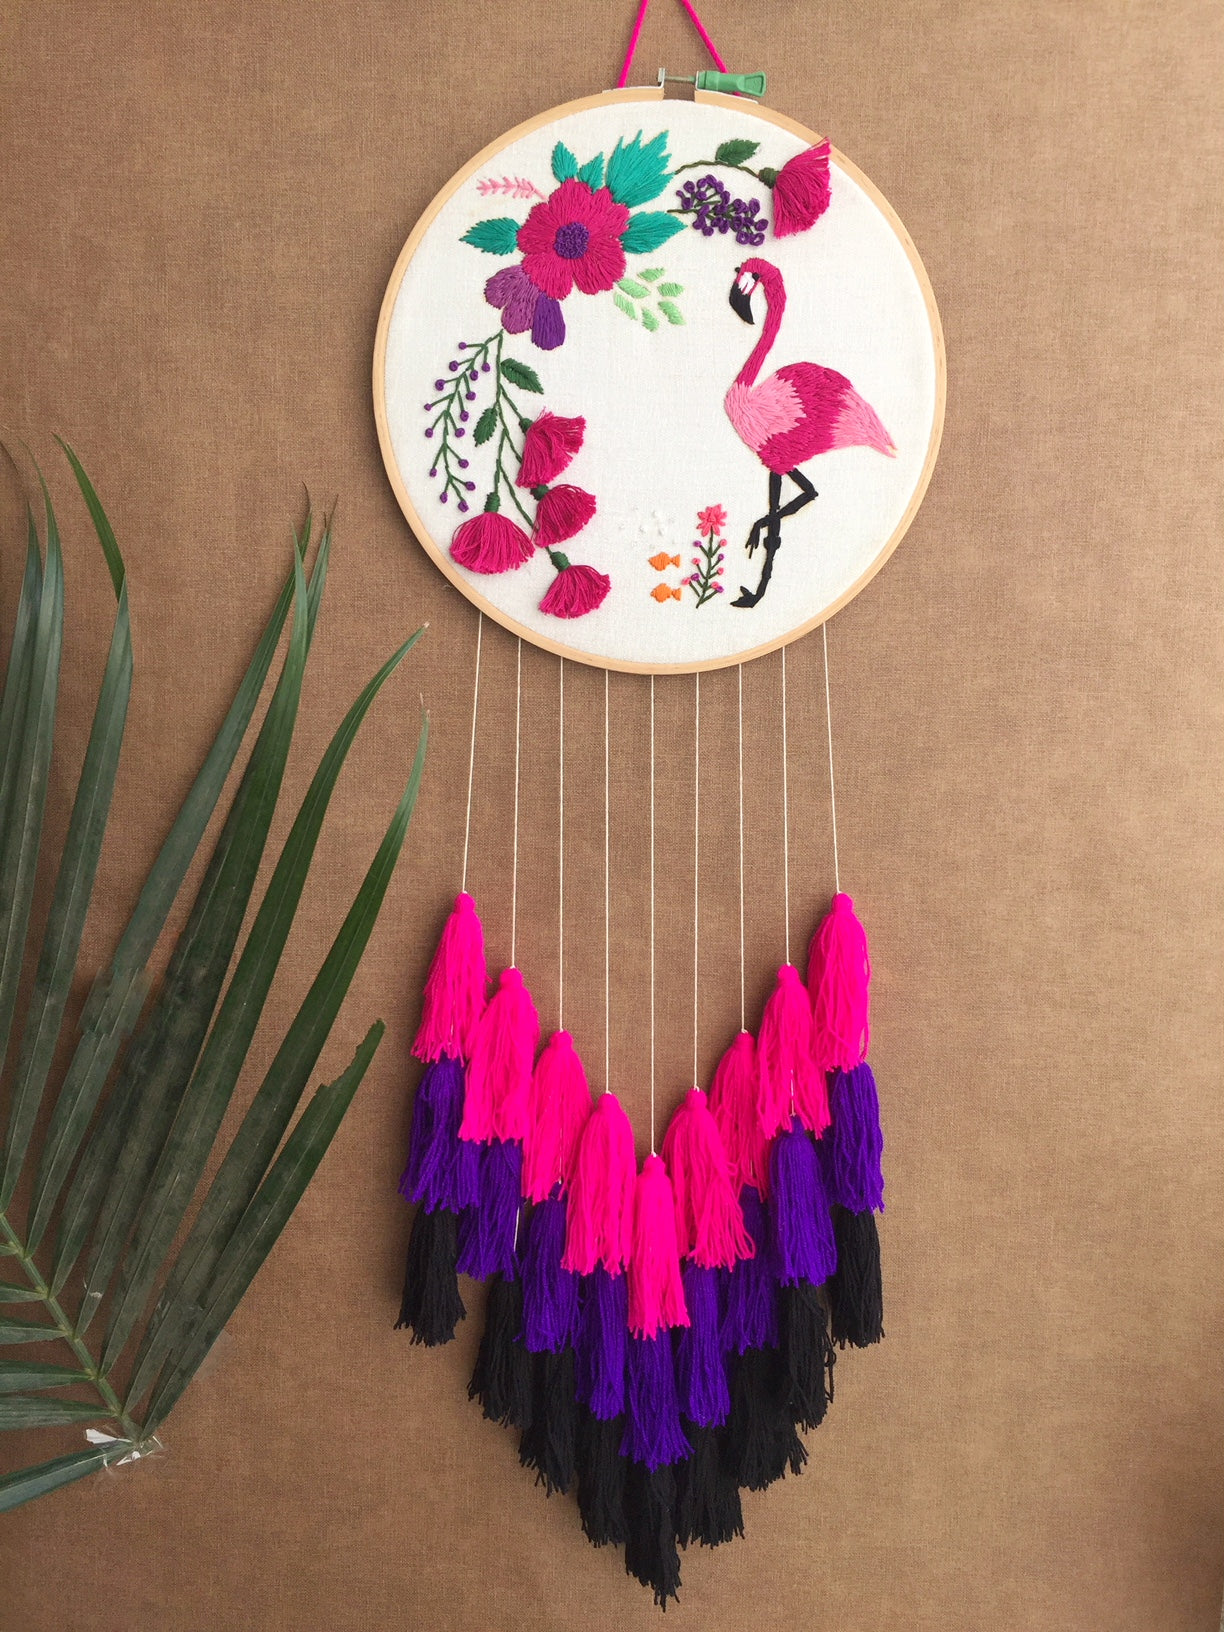 Hand Embroidered Floral & Flamingo Dreamcatcher - The Tassle Life 